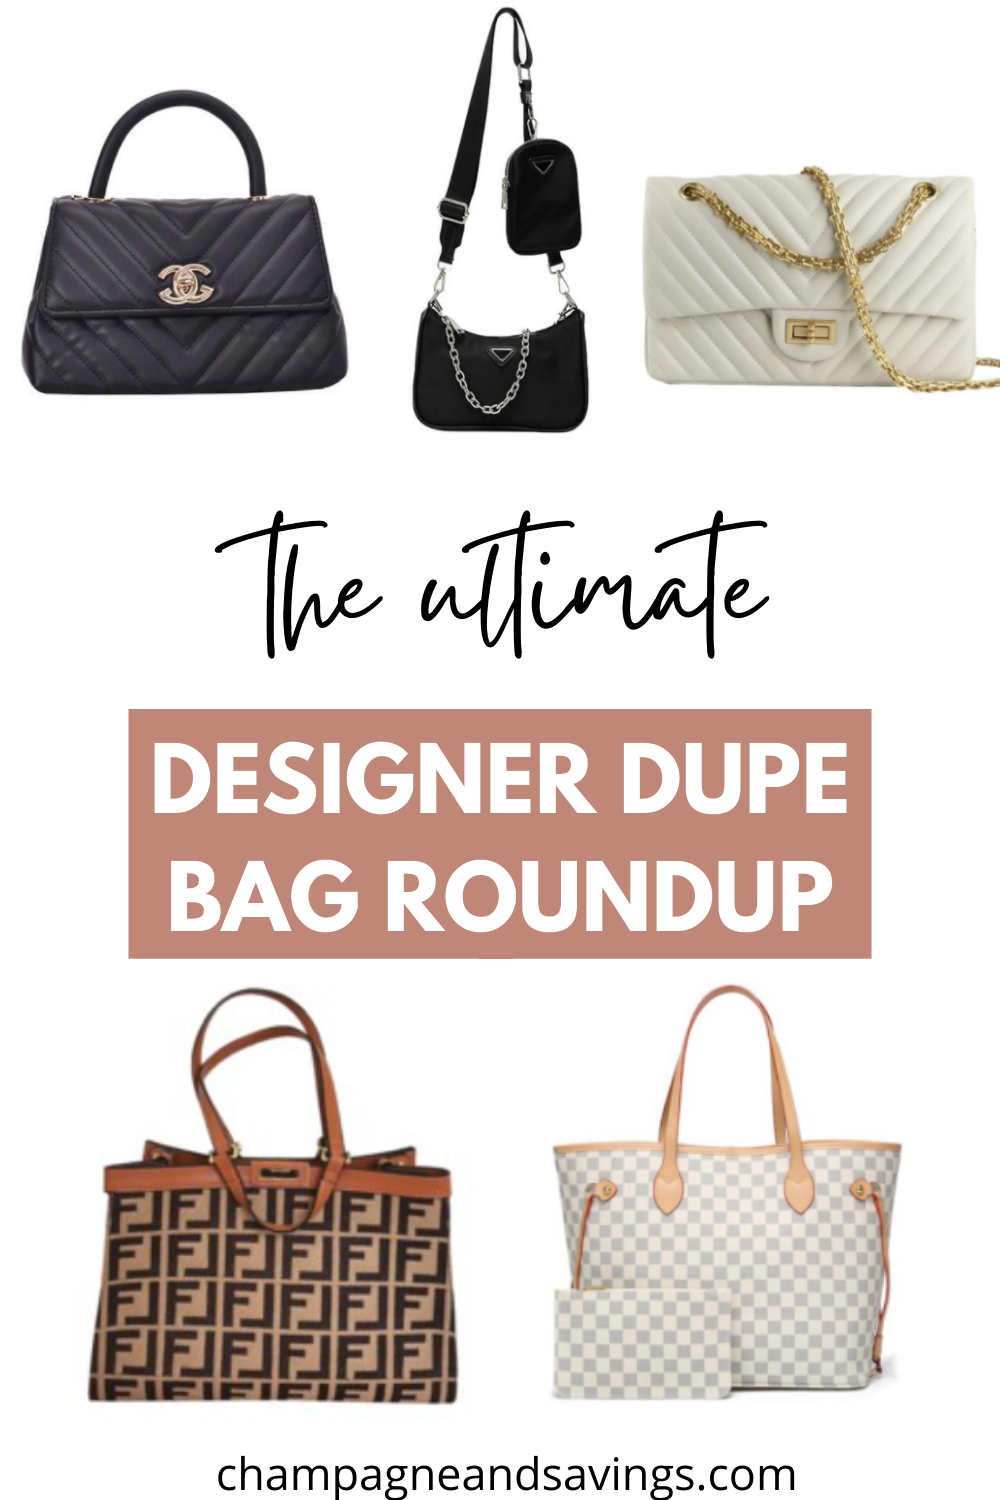 The Top Designer Handbags of 2019 - Forbes Vetted